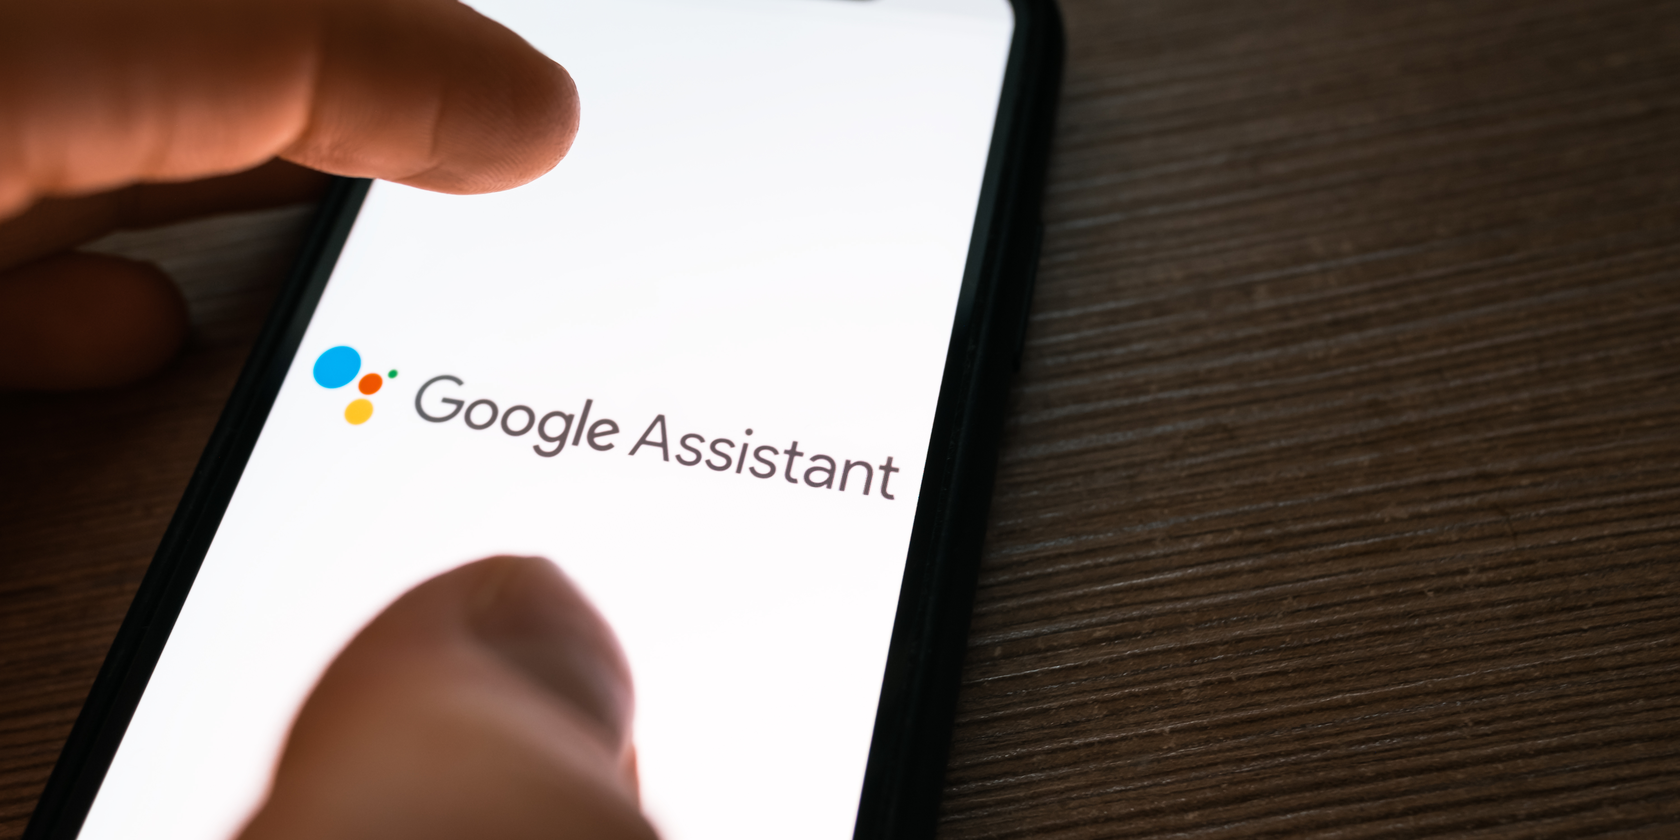 Using Google Assistant on a phone